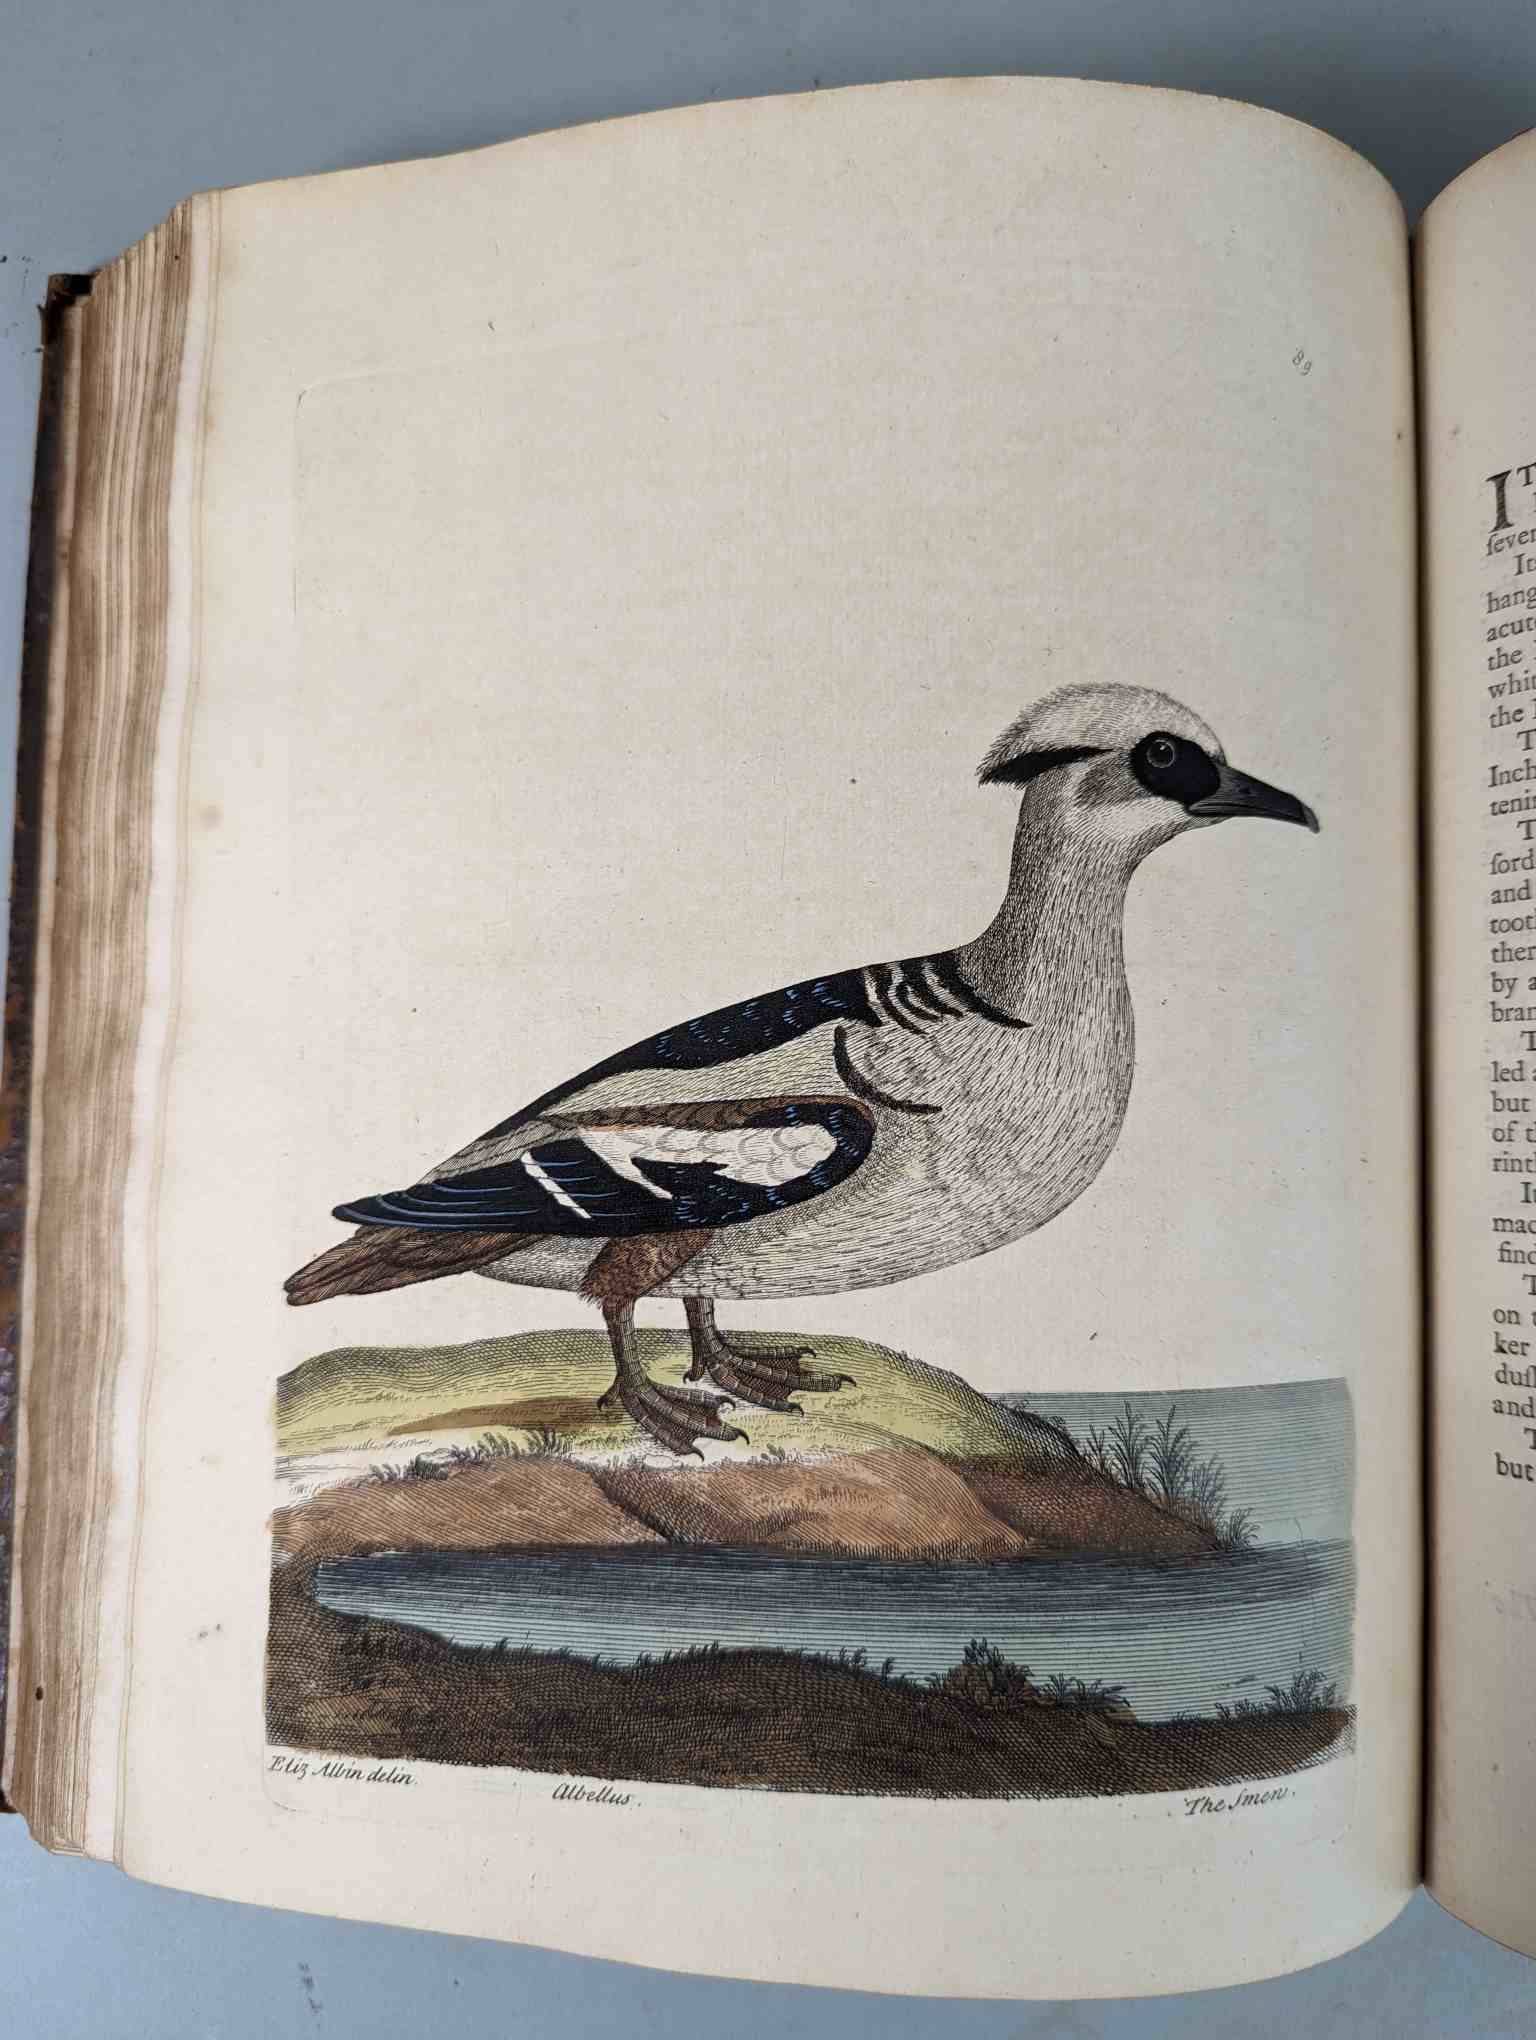 ALBIN, Eleazar. A Natural History of Birds, to which are added, Notes and Observations by W. - Image 92 of 208